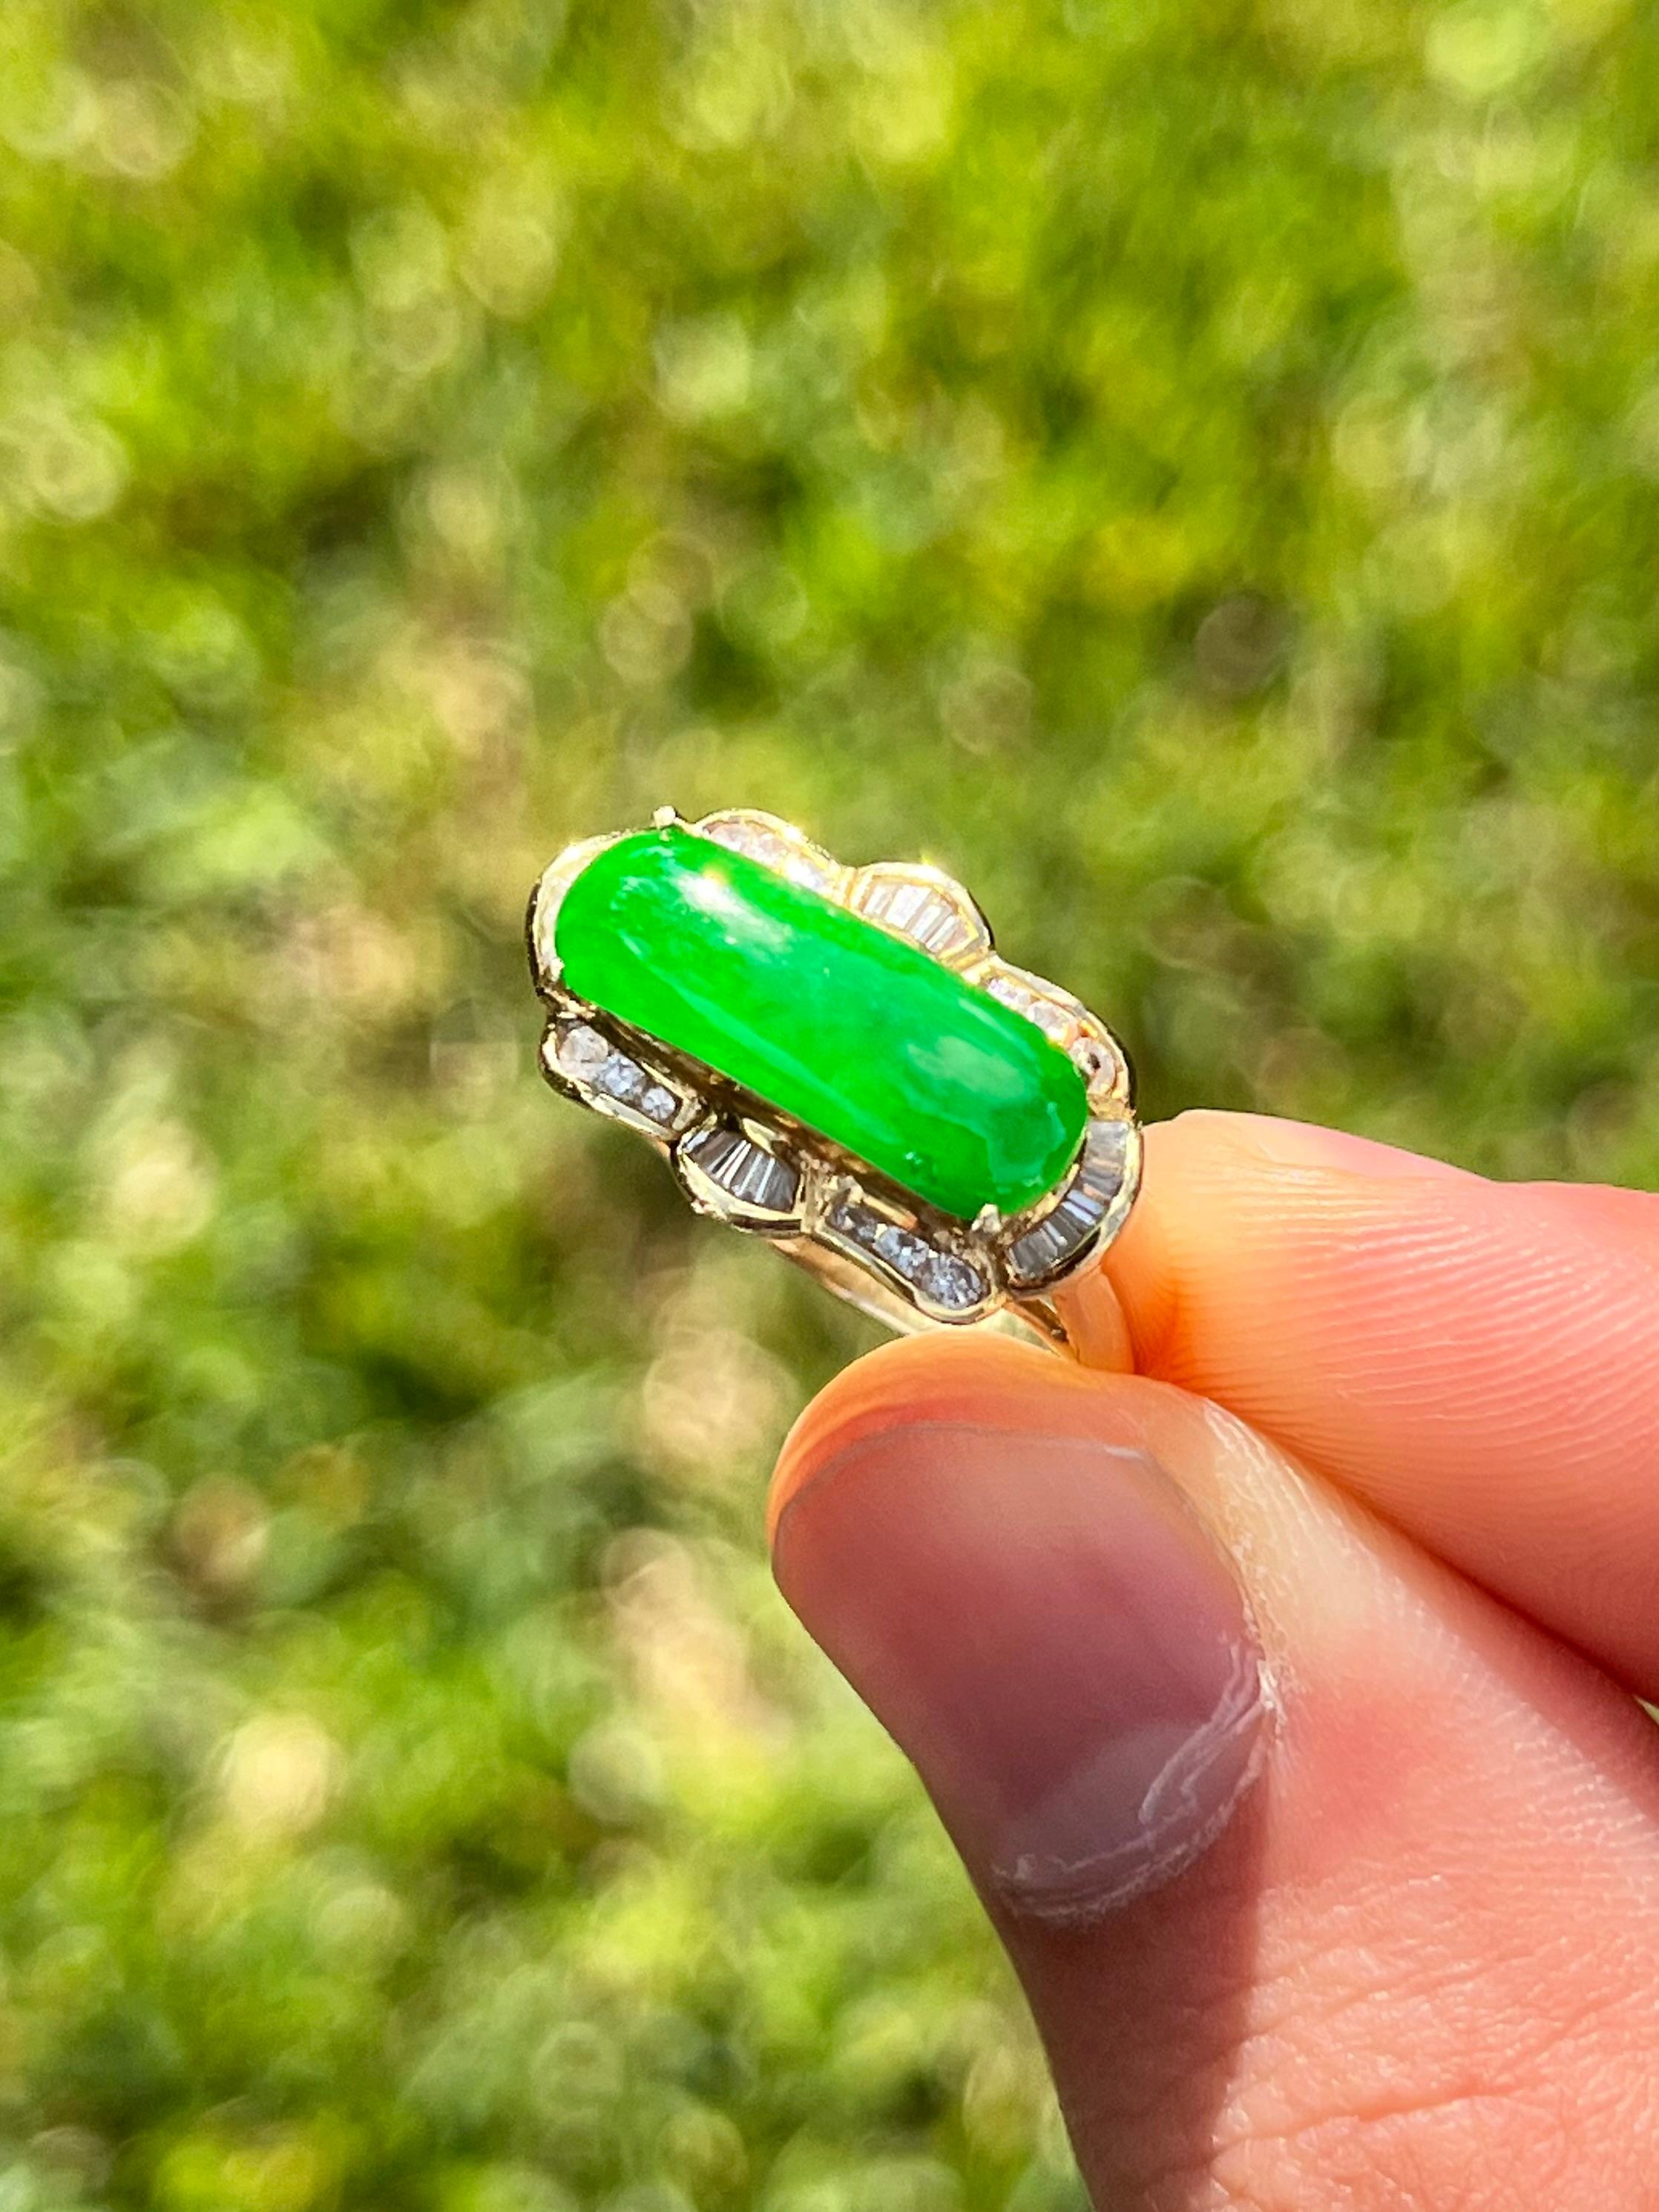 This ring centers a 4-carat Jadeite Jade with natural diamond side stones. This ring has a dainty and delicate flair design that gives the optics of an elongated Jade center stone.

This piece is super light and cute, versatile enough for both